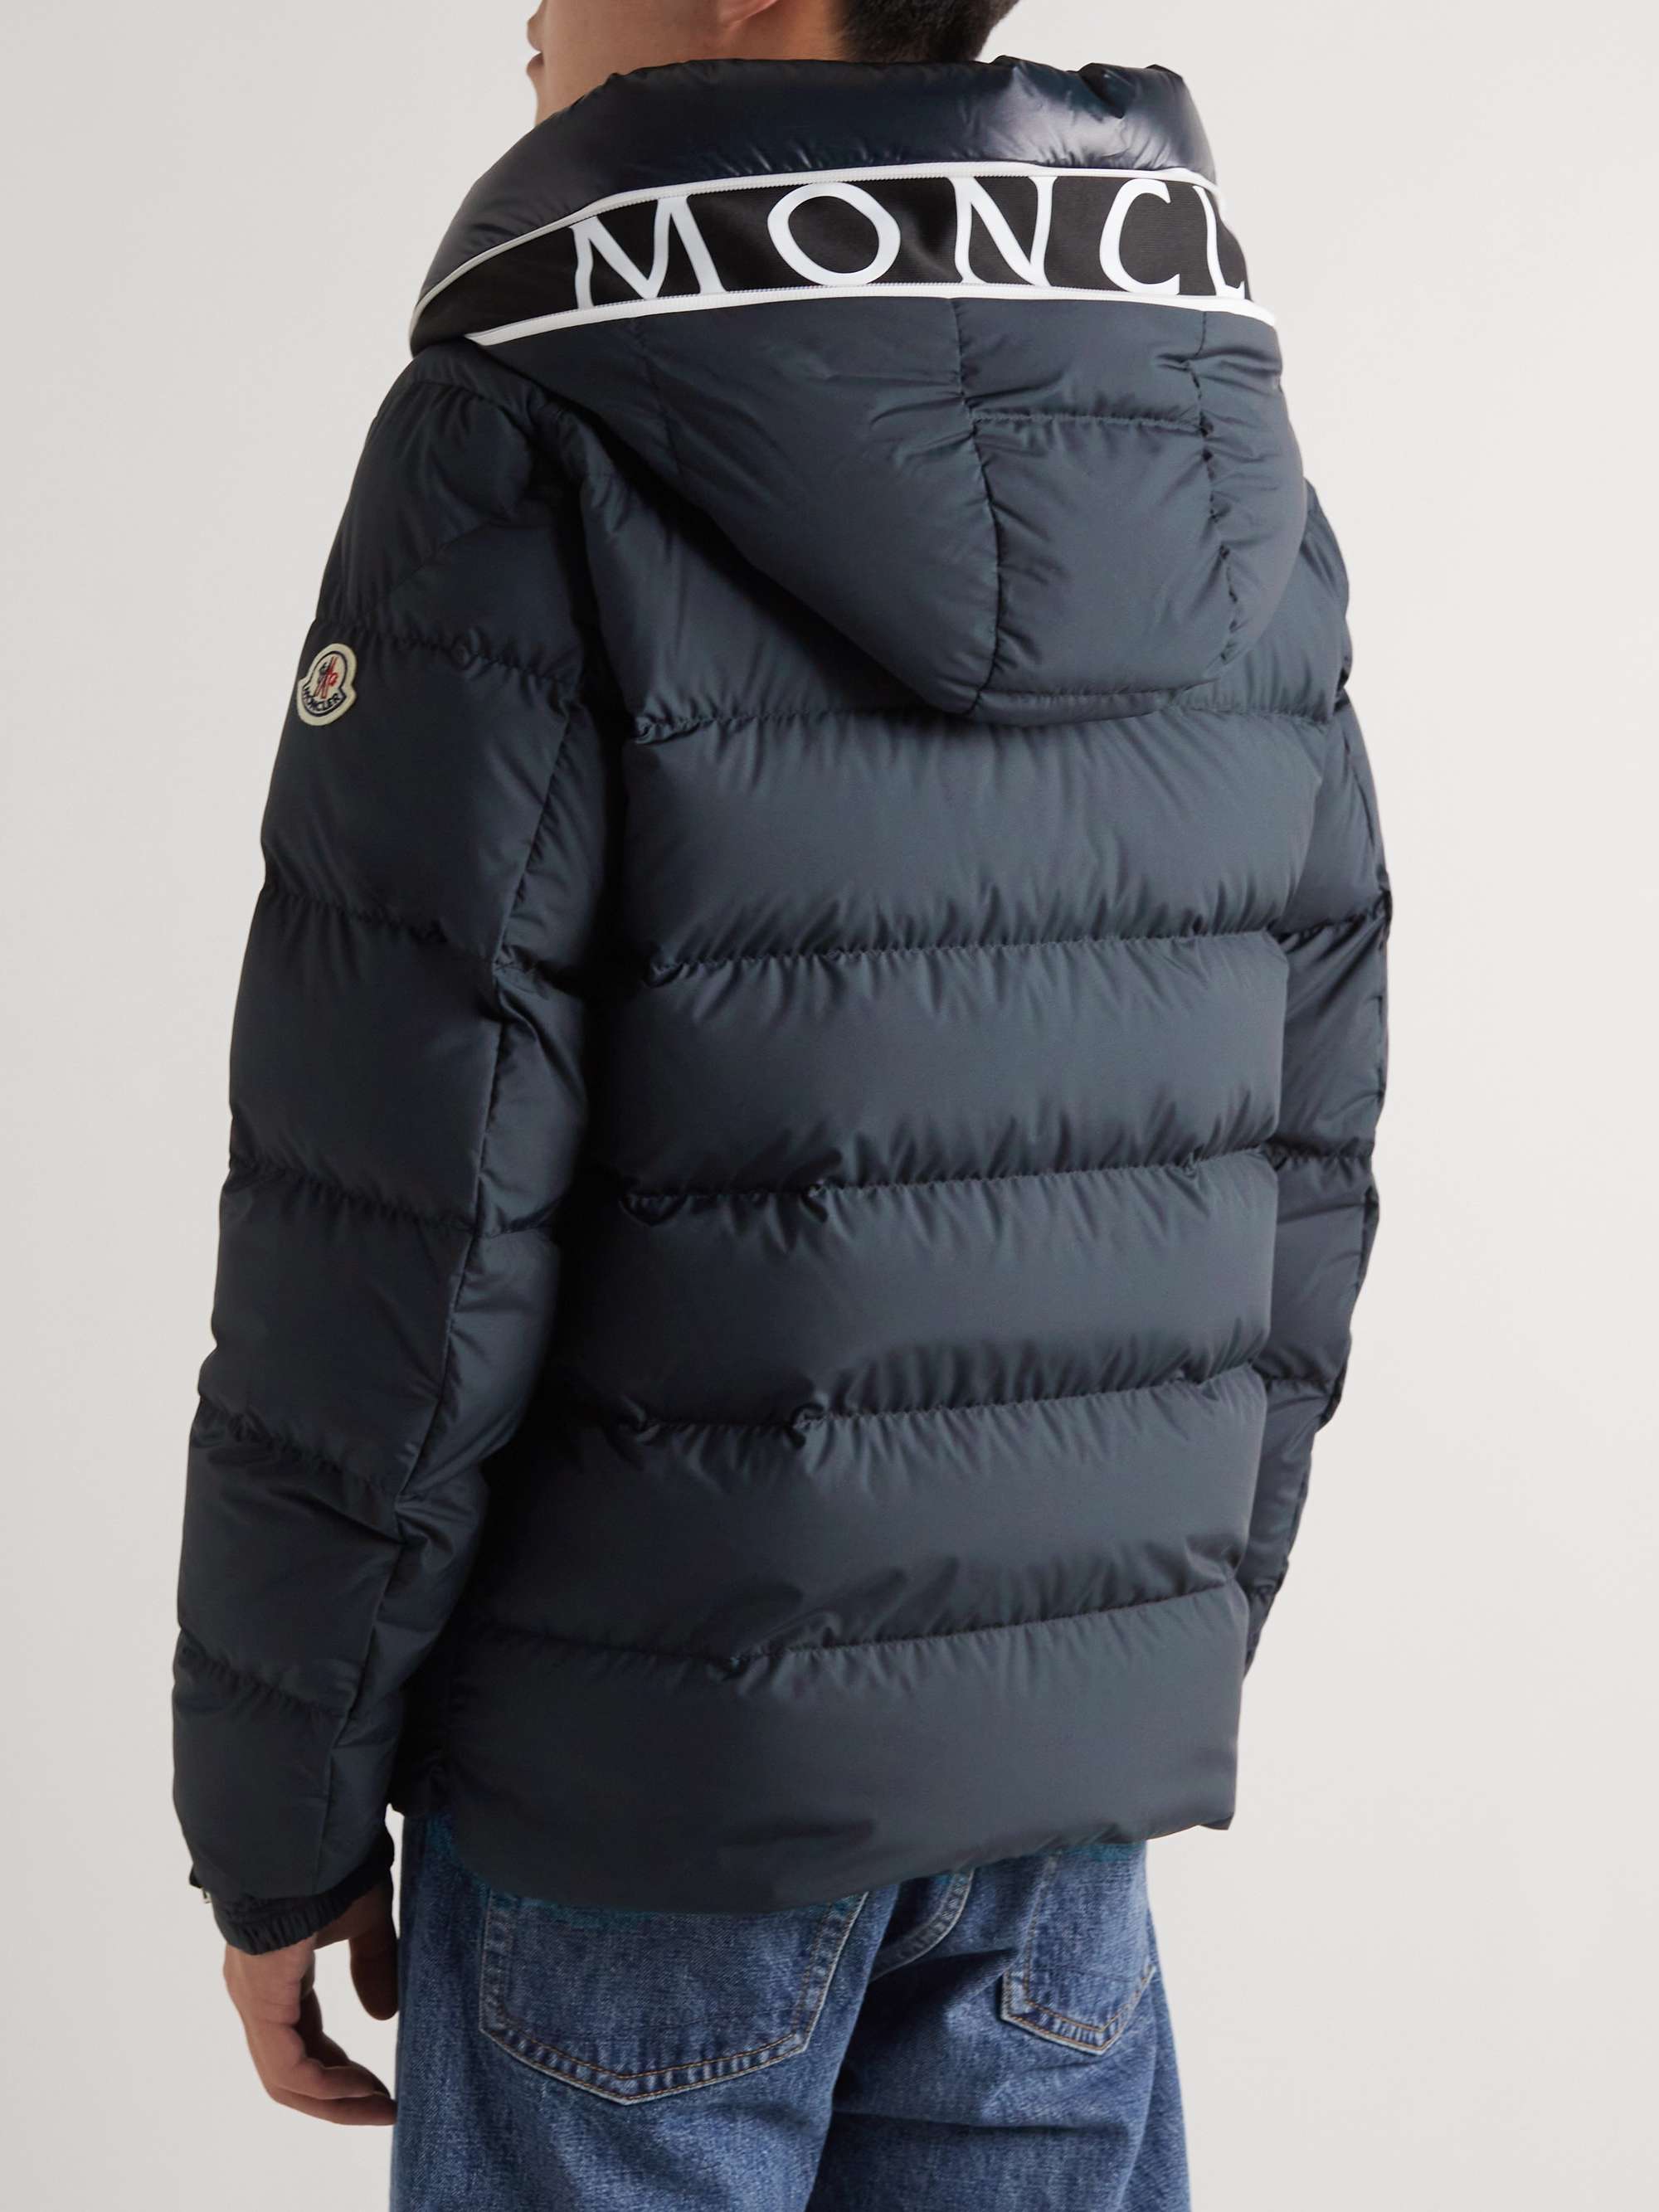 Resistent Millimeter 945 MONCLER Cardere Logo-Print Quilted Shell Hooded Down Jacket | MR PORTER